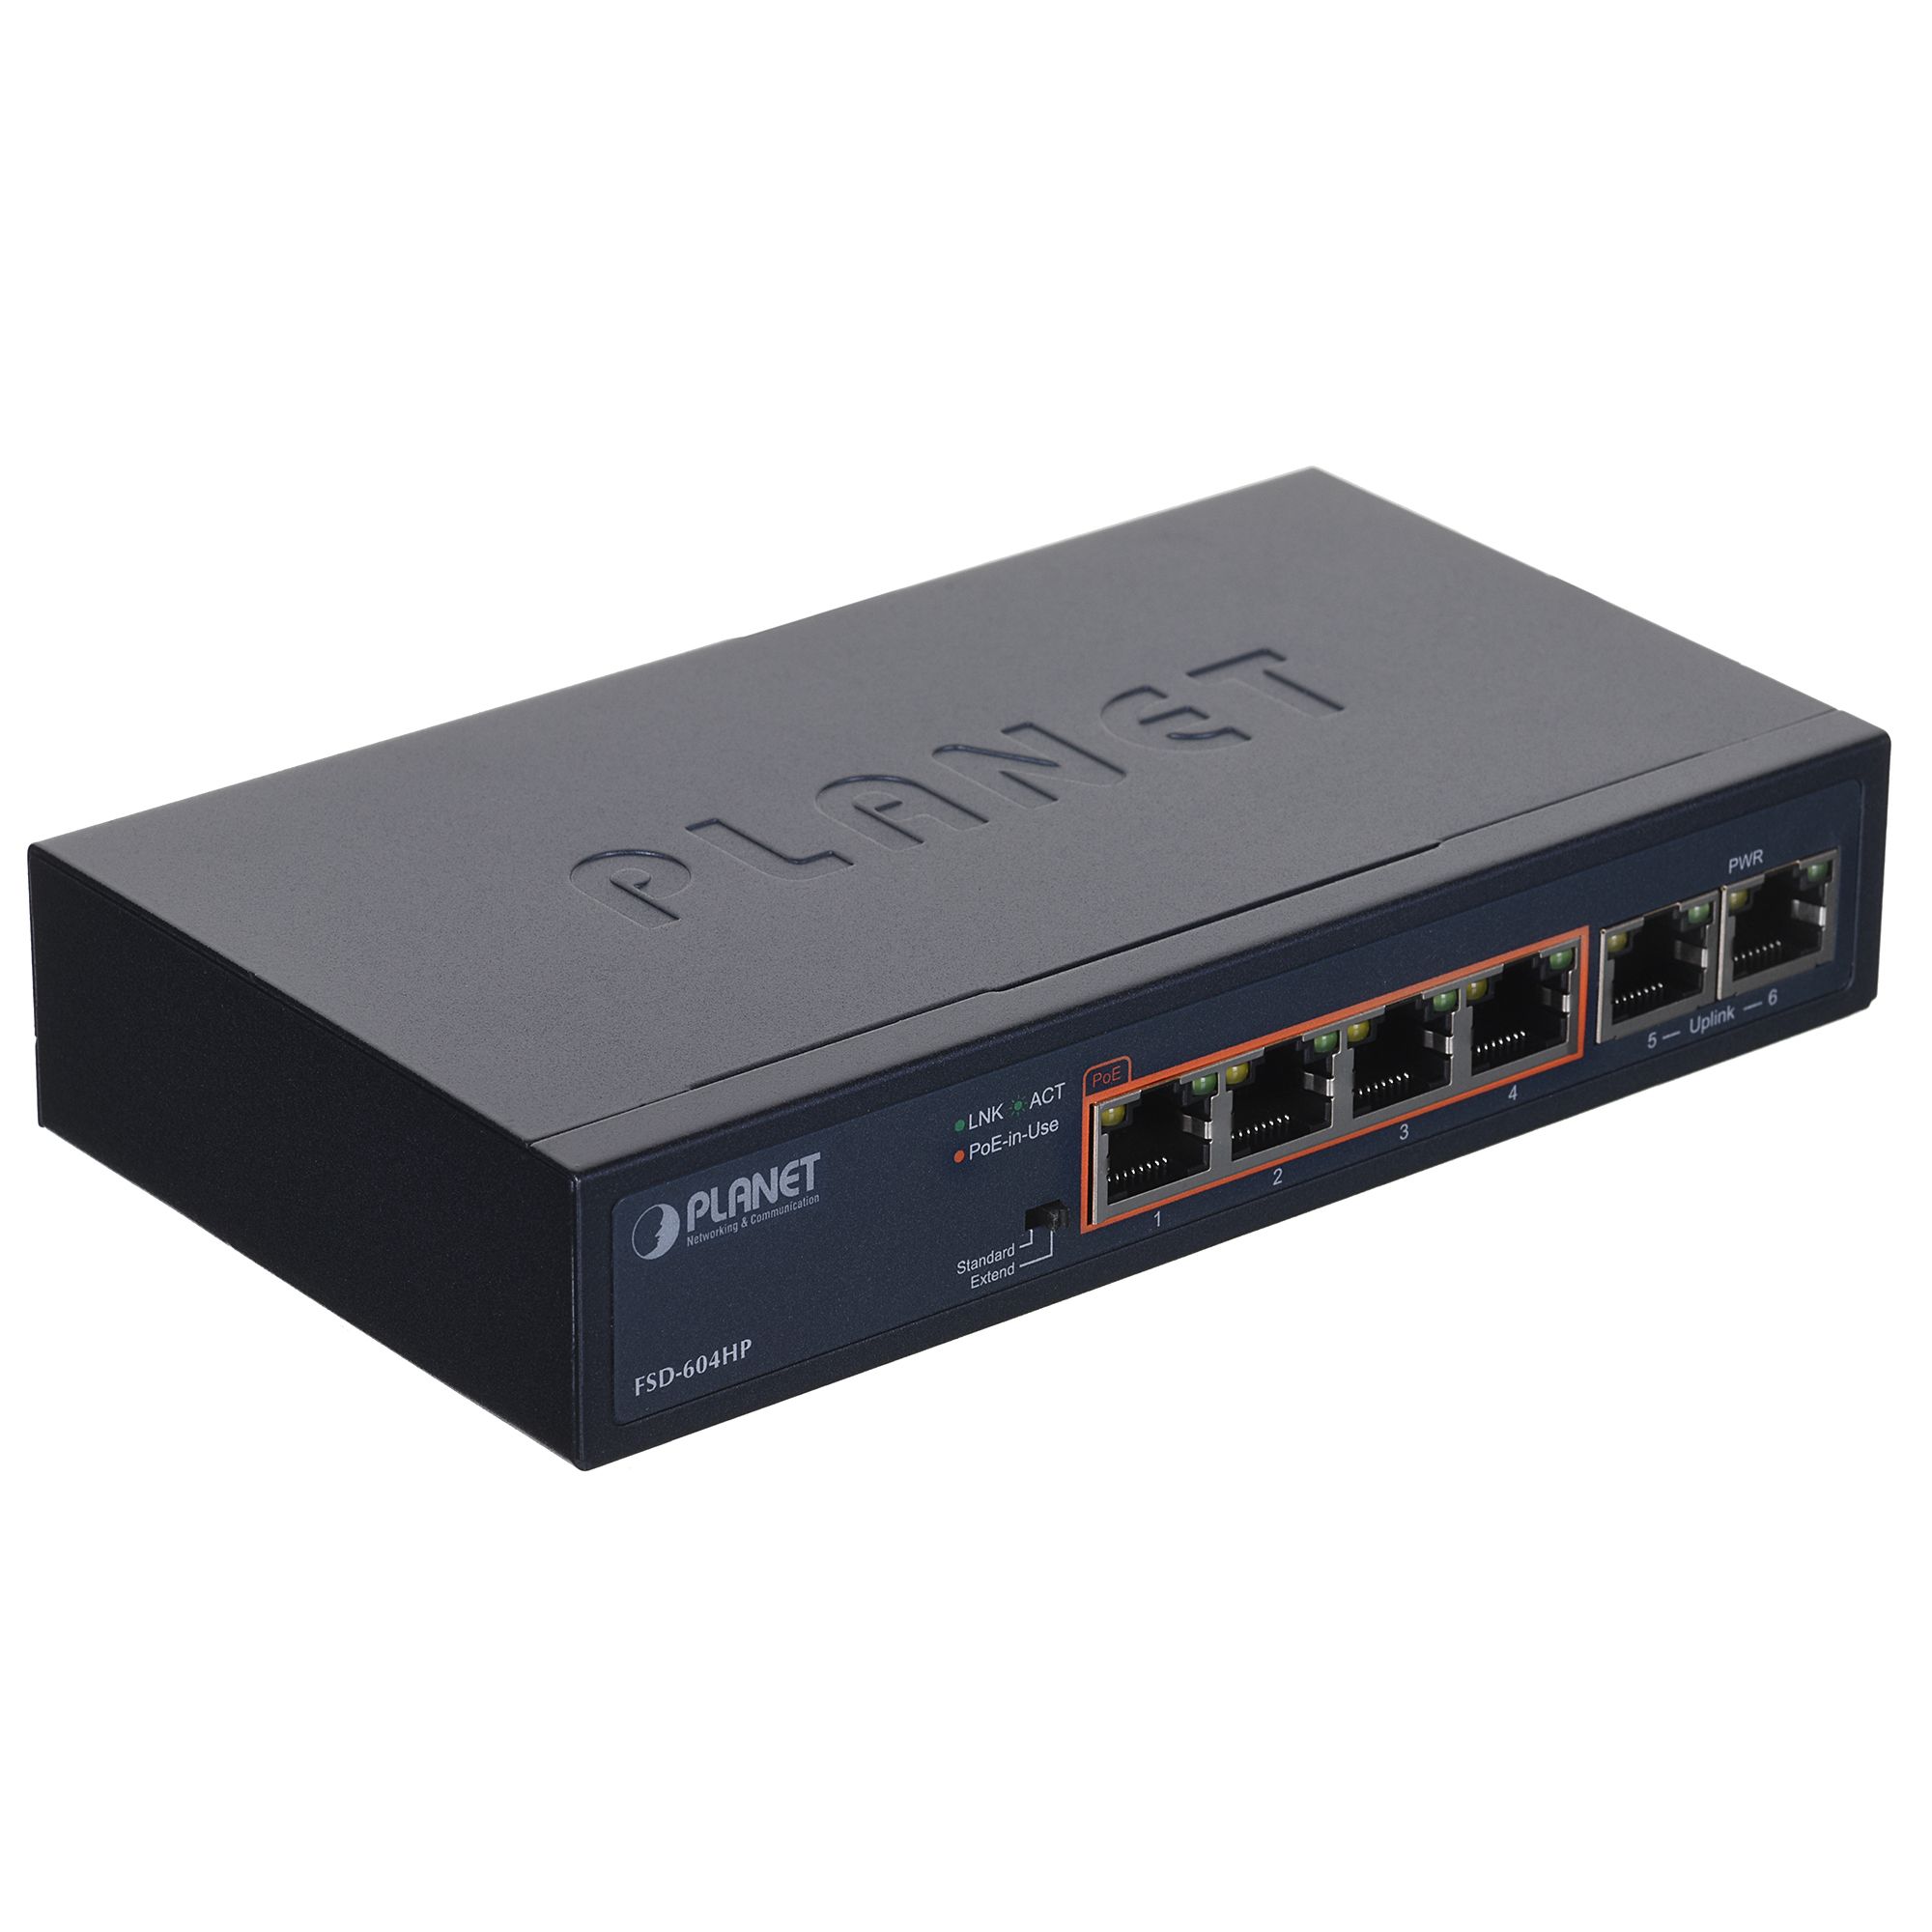 PLANET FSD-604HP network switch Unmanaged Fast Ethernet (10/100) Power over Ethernet (PoE) Blue_2